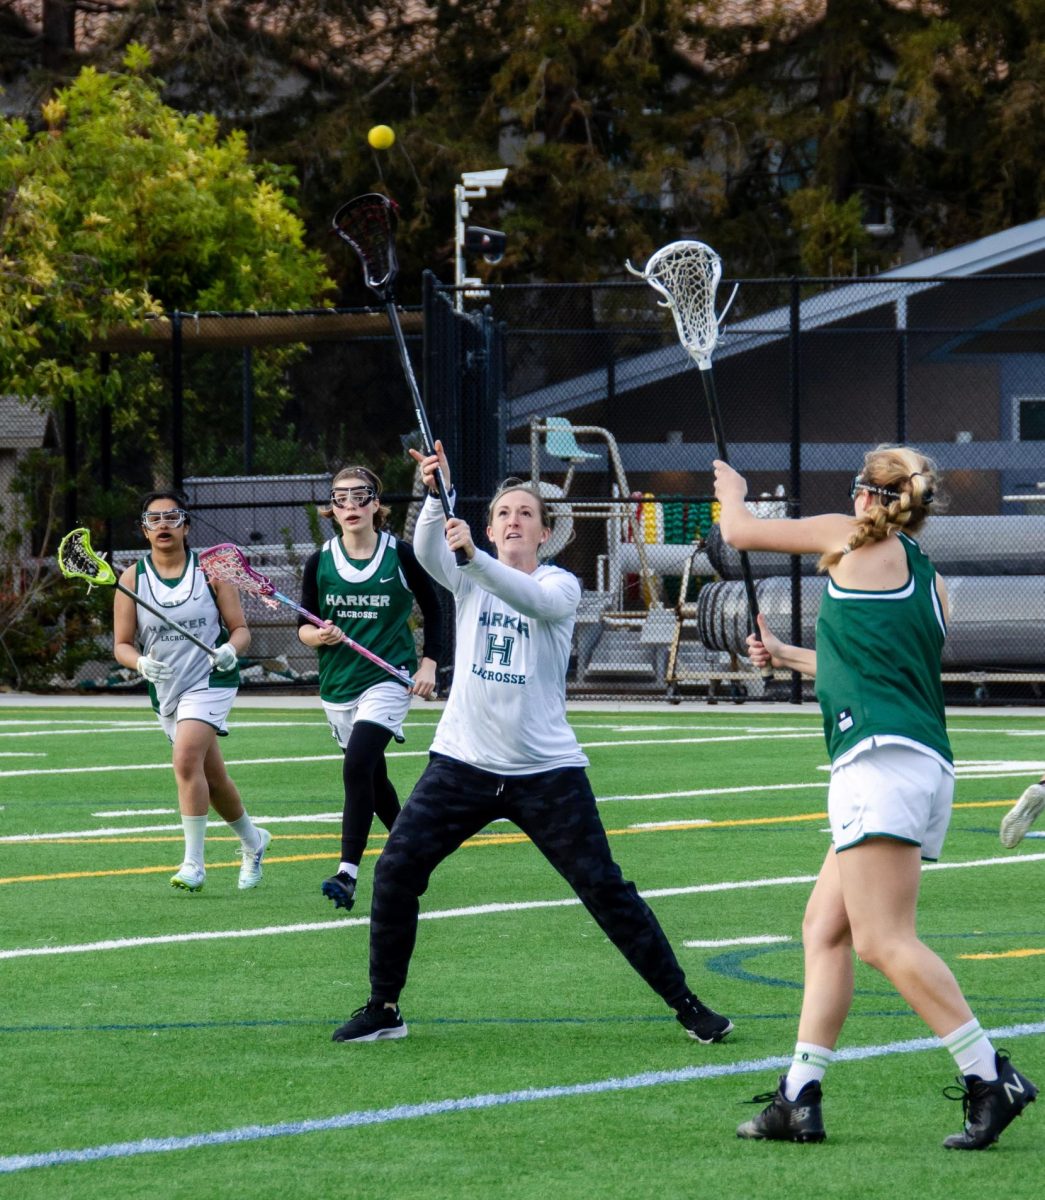 Head coach Lauren Brown attempts to block a pass during a lacrosse team practice. She stepped in during a practice drill acting as a defender.